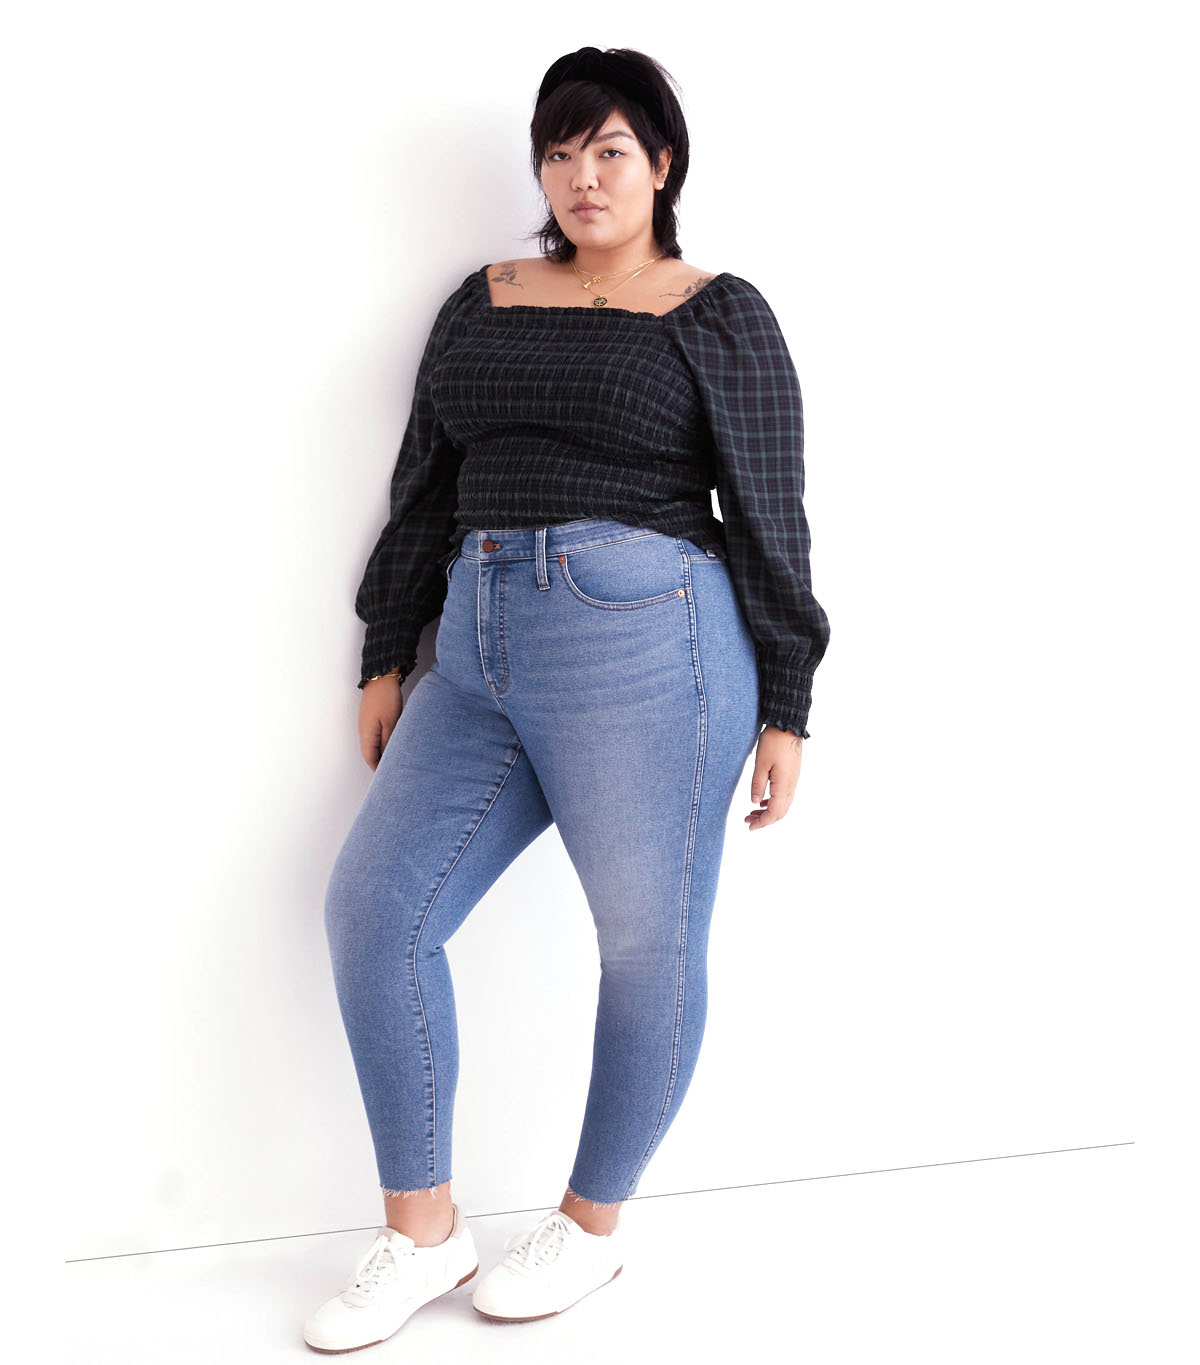 caitlin thomas recommends Thick Women In Jeans